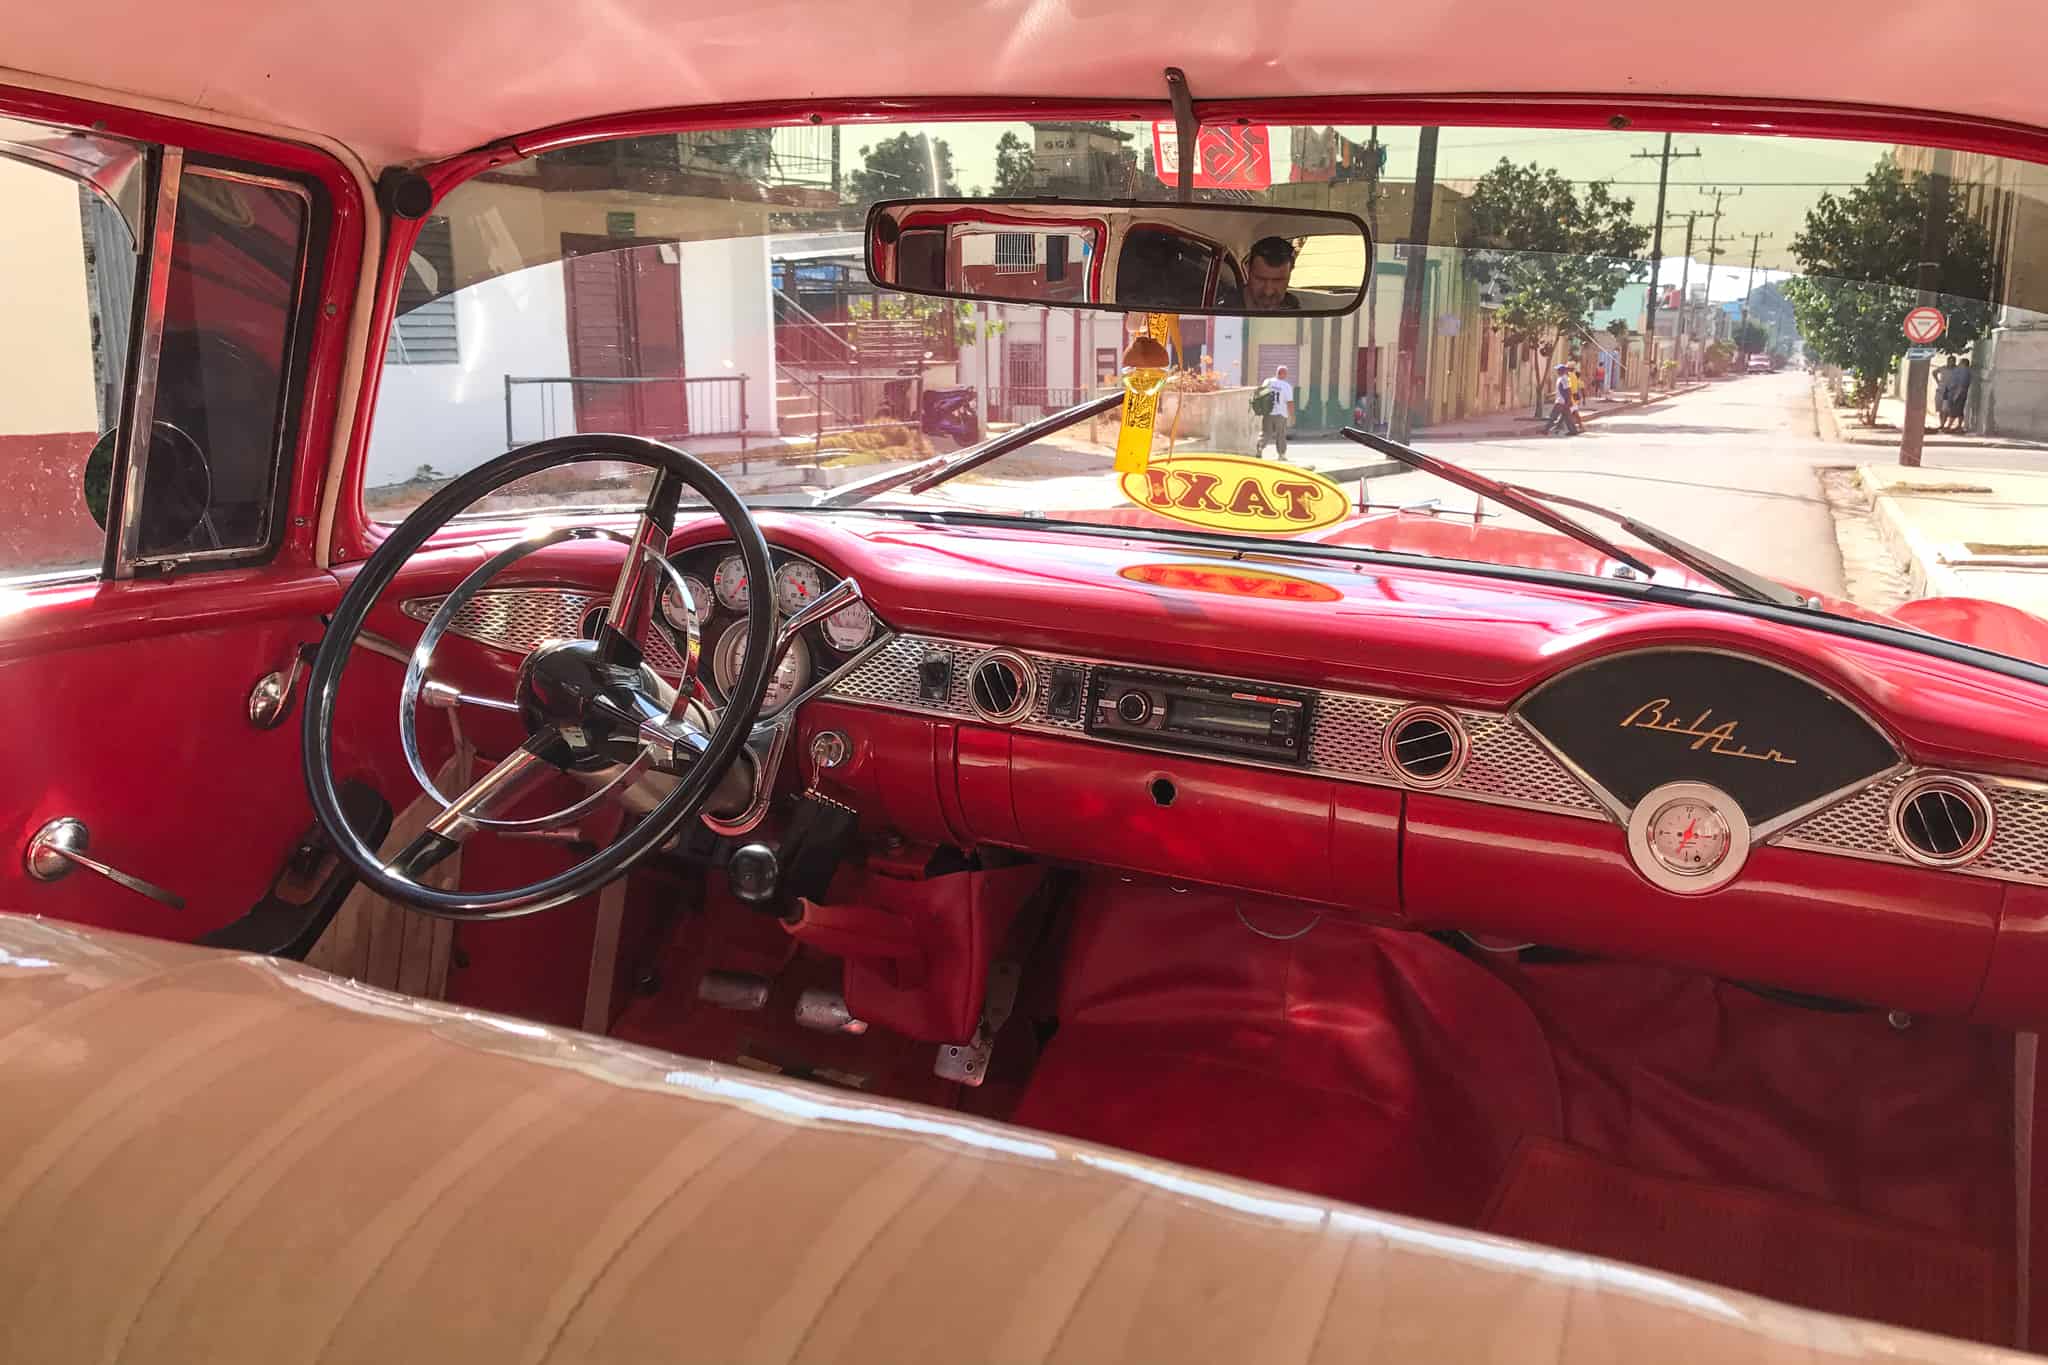 Pink and white interior of a restored vintage Bel Air taxi in Cuba.